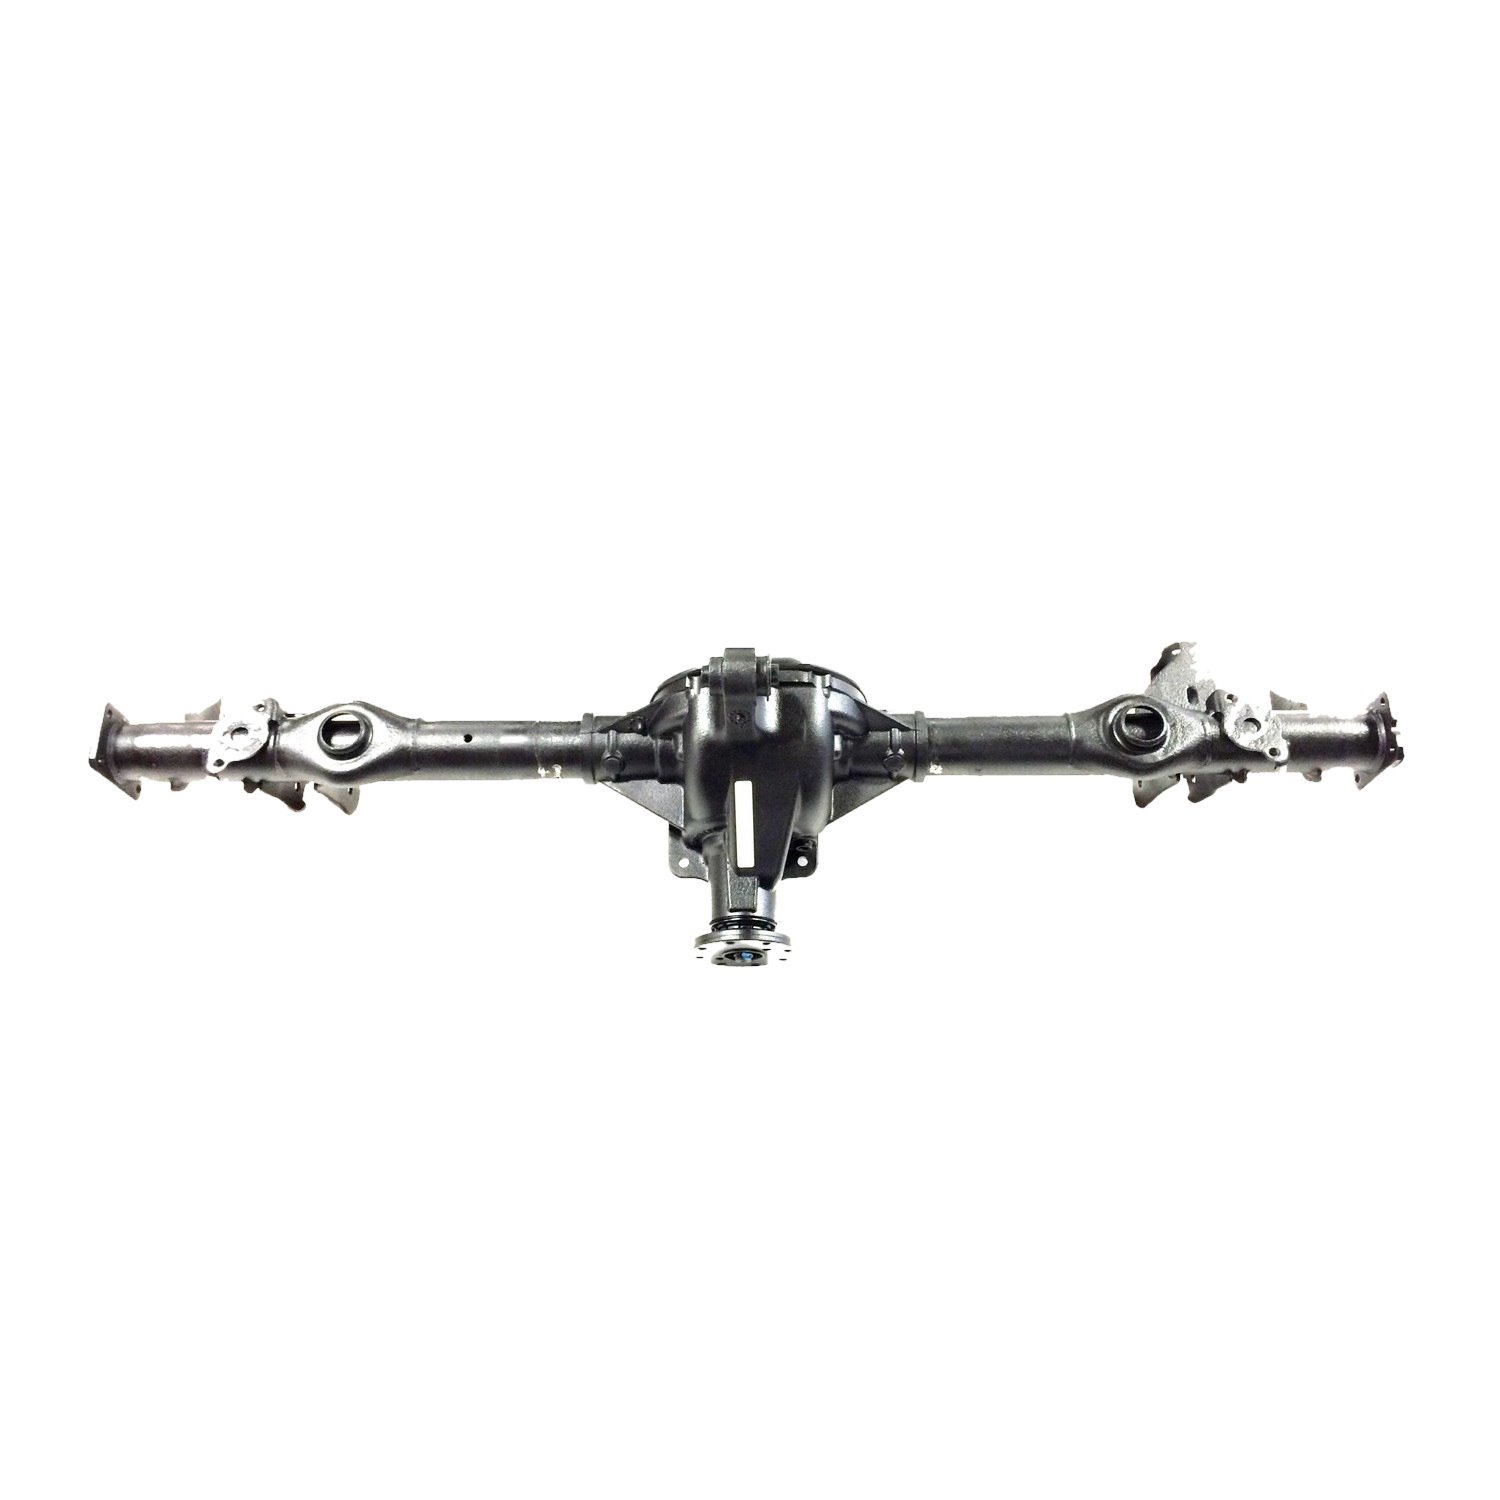 Remanufactured Axle Assembly for 1973-1983 12 Bolt 4WD General Motors Truck